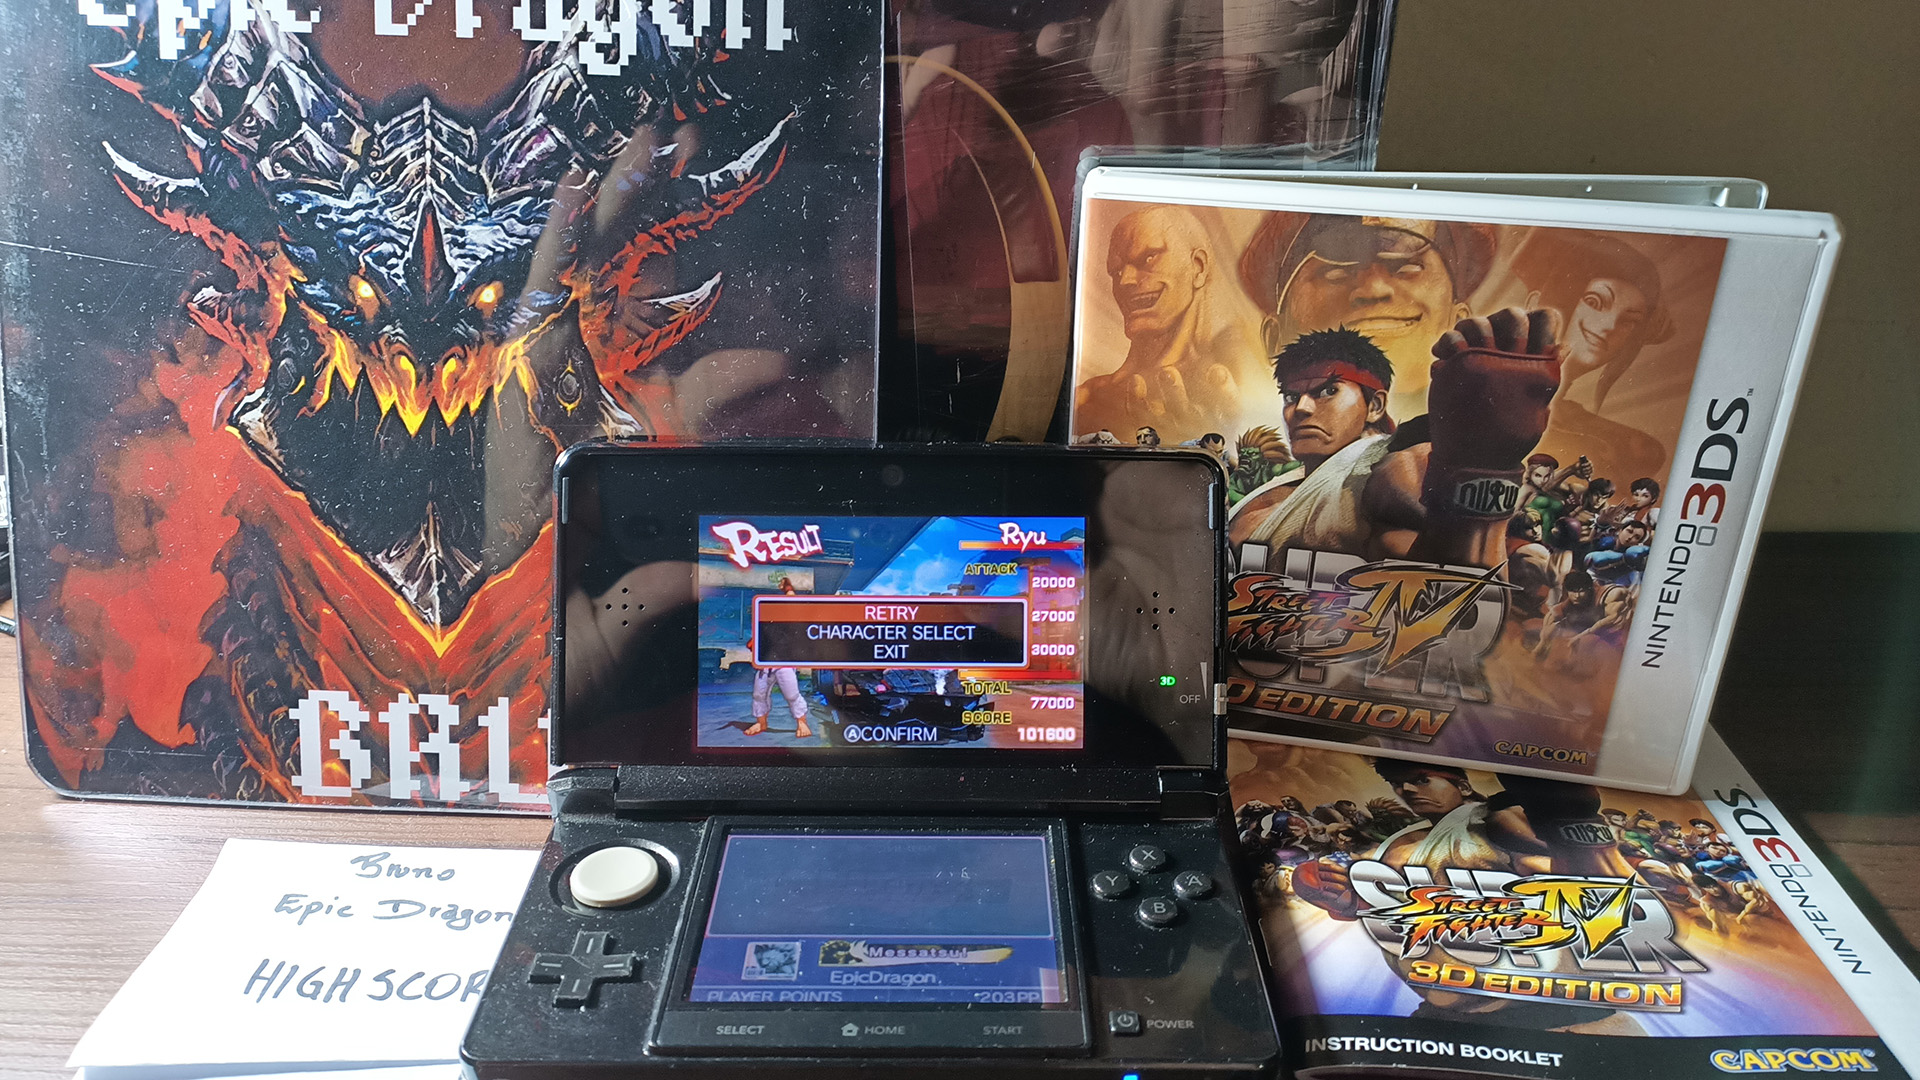 EpicDragon: Super Street Fighter IV 3D Edition: Challenge: Car Crusher: Ryu (Nintendo 3DS) 101,600 points on 2022-08-17 21:10:42